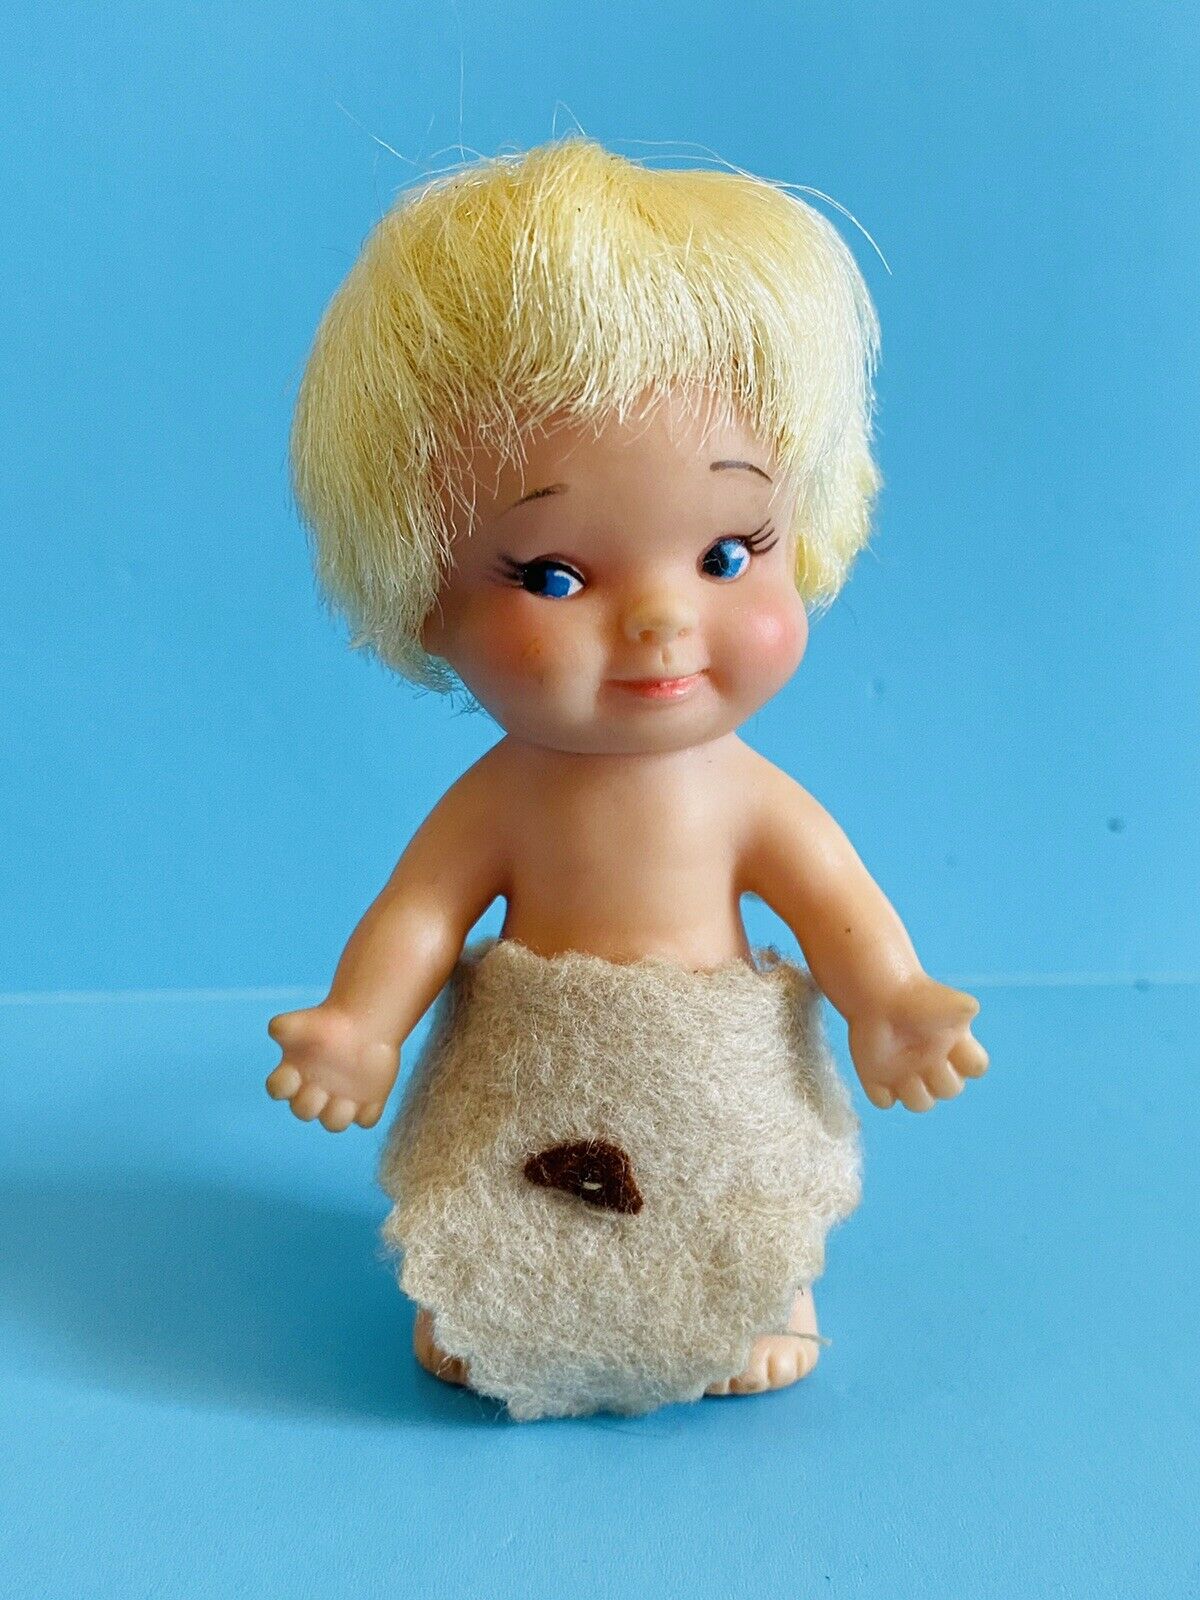 Vintage Doll Toy - Uneeda Pee Wees Blonde Caveman Bambam - Ud. Co Inc 1965